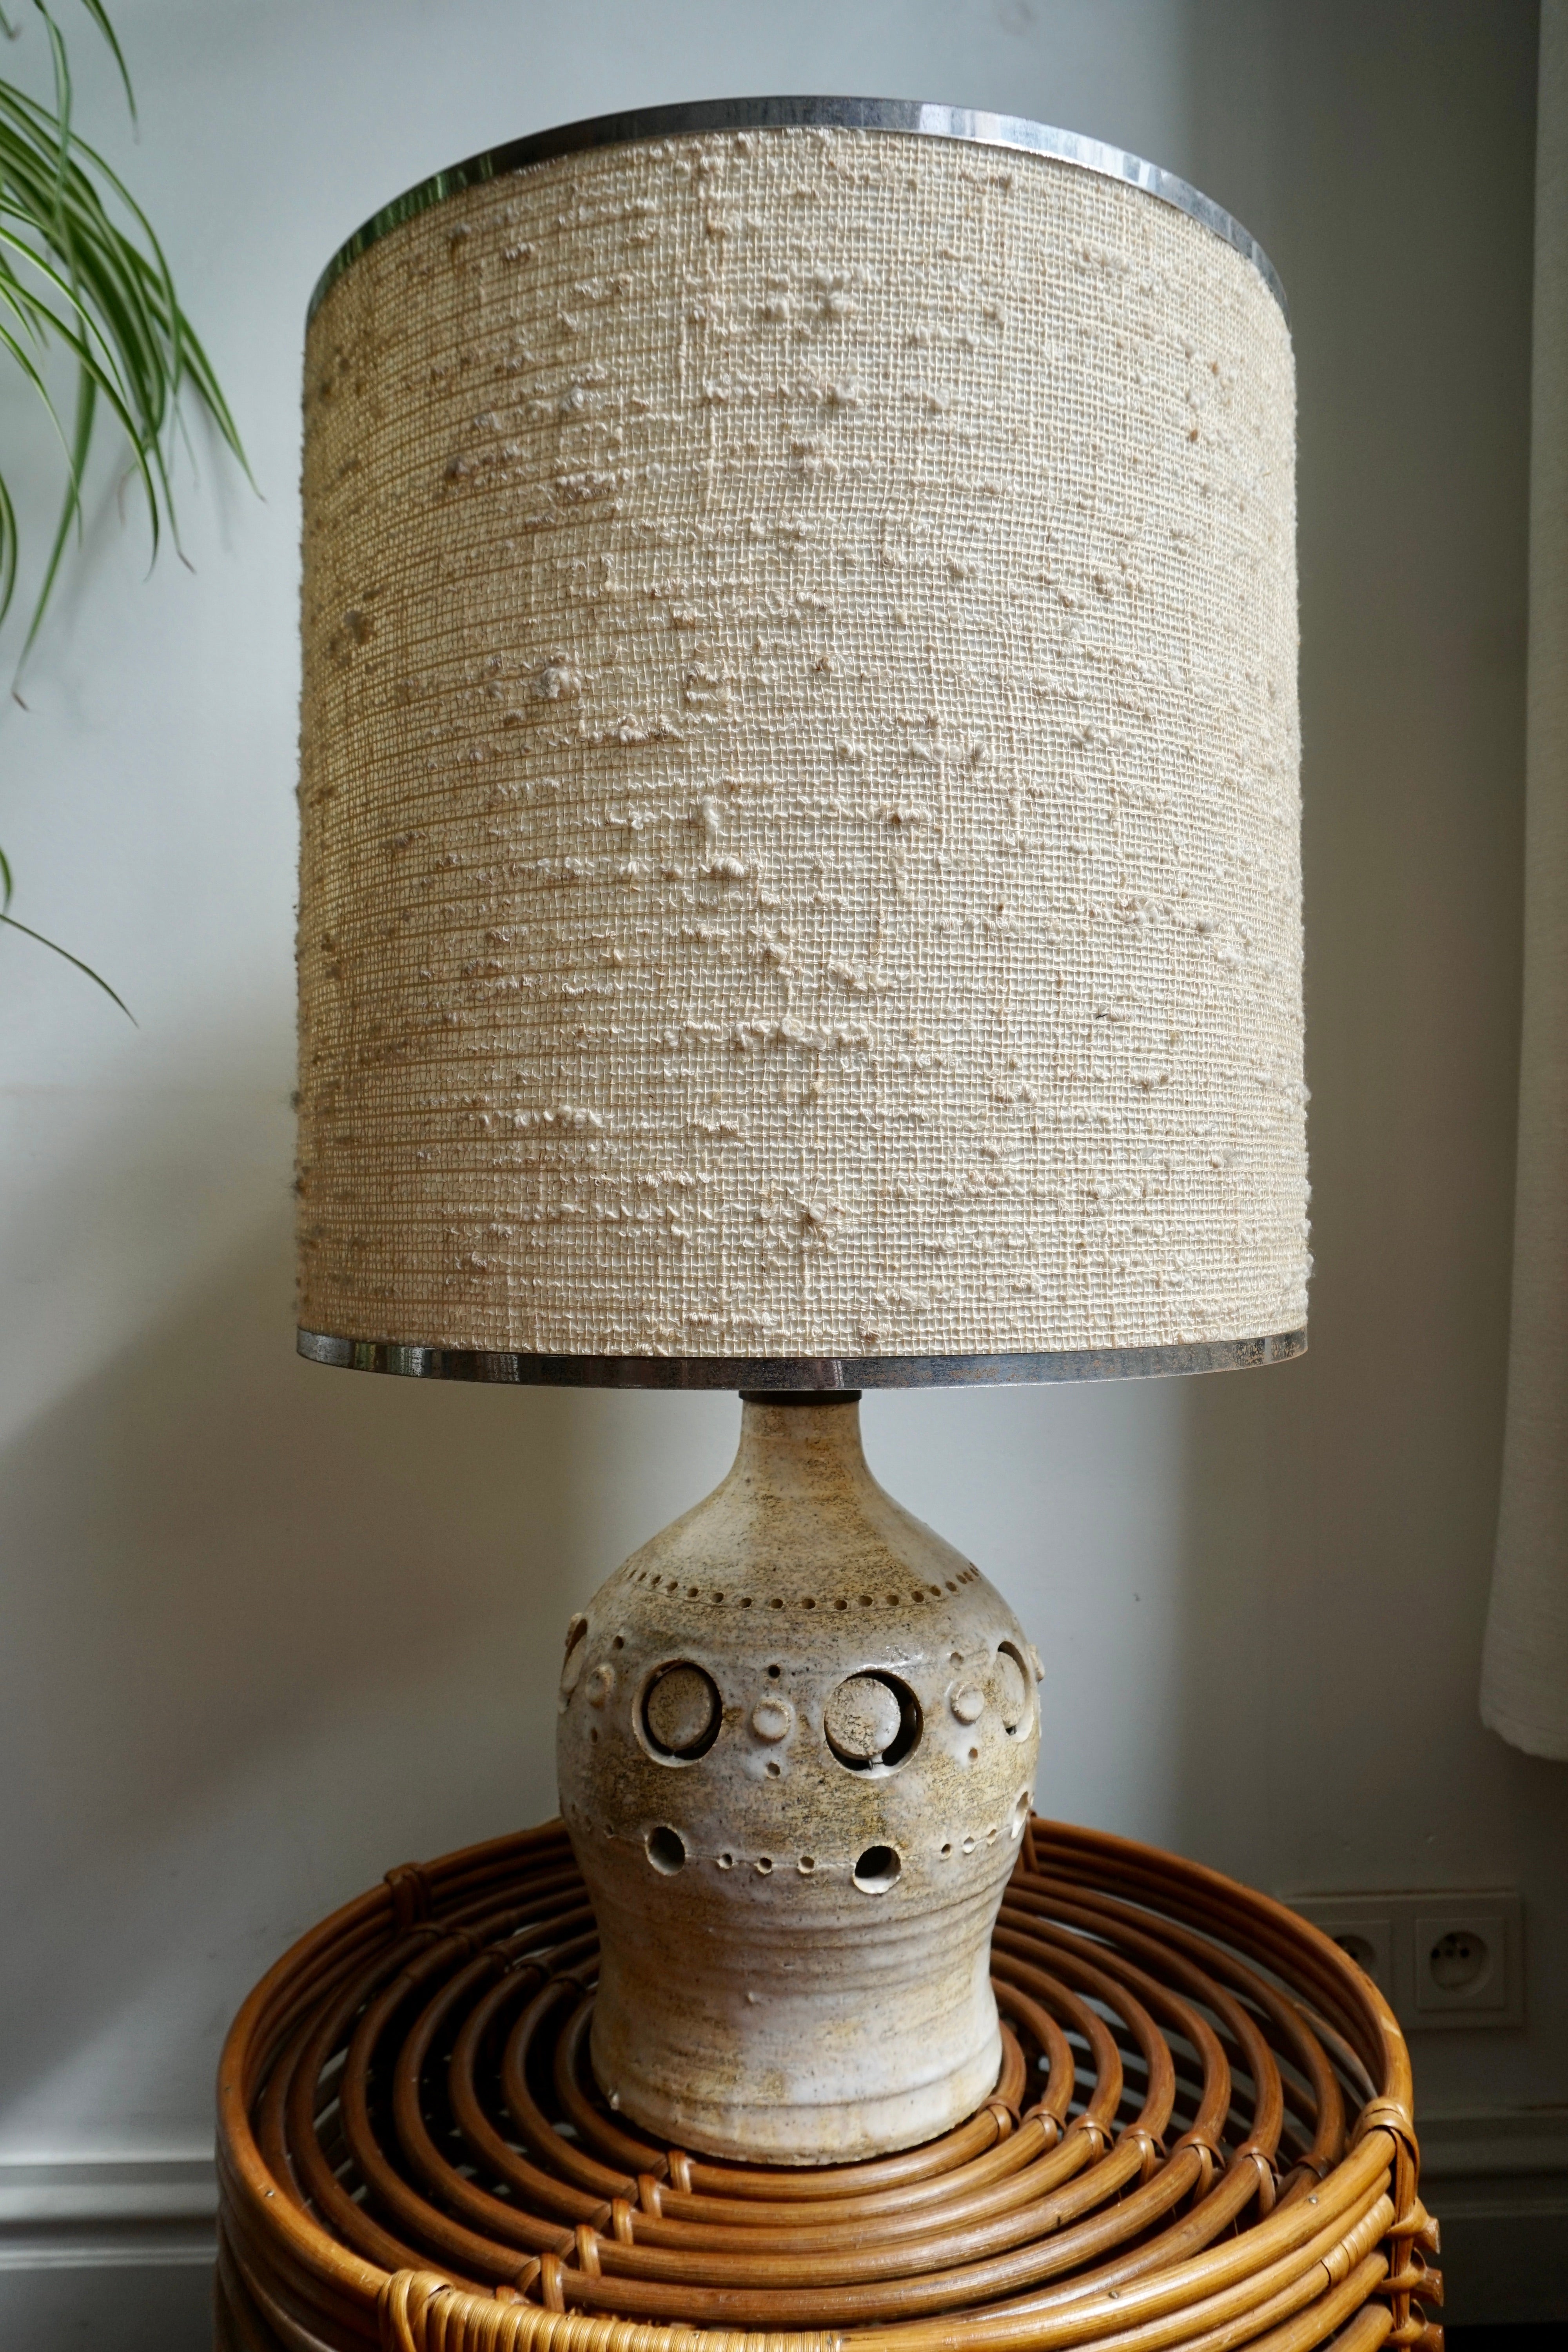 Georges Pelletier Table lamp with original shade.

Ceramic lamp, cream-white and brown tones, adorned with perforations and circles in yellow tones.  
French work realized in the 1970s.

Dimensions with out shade H 11.8